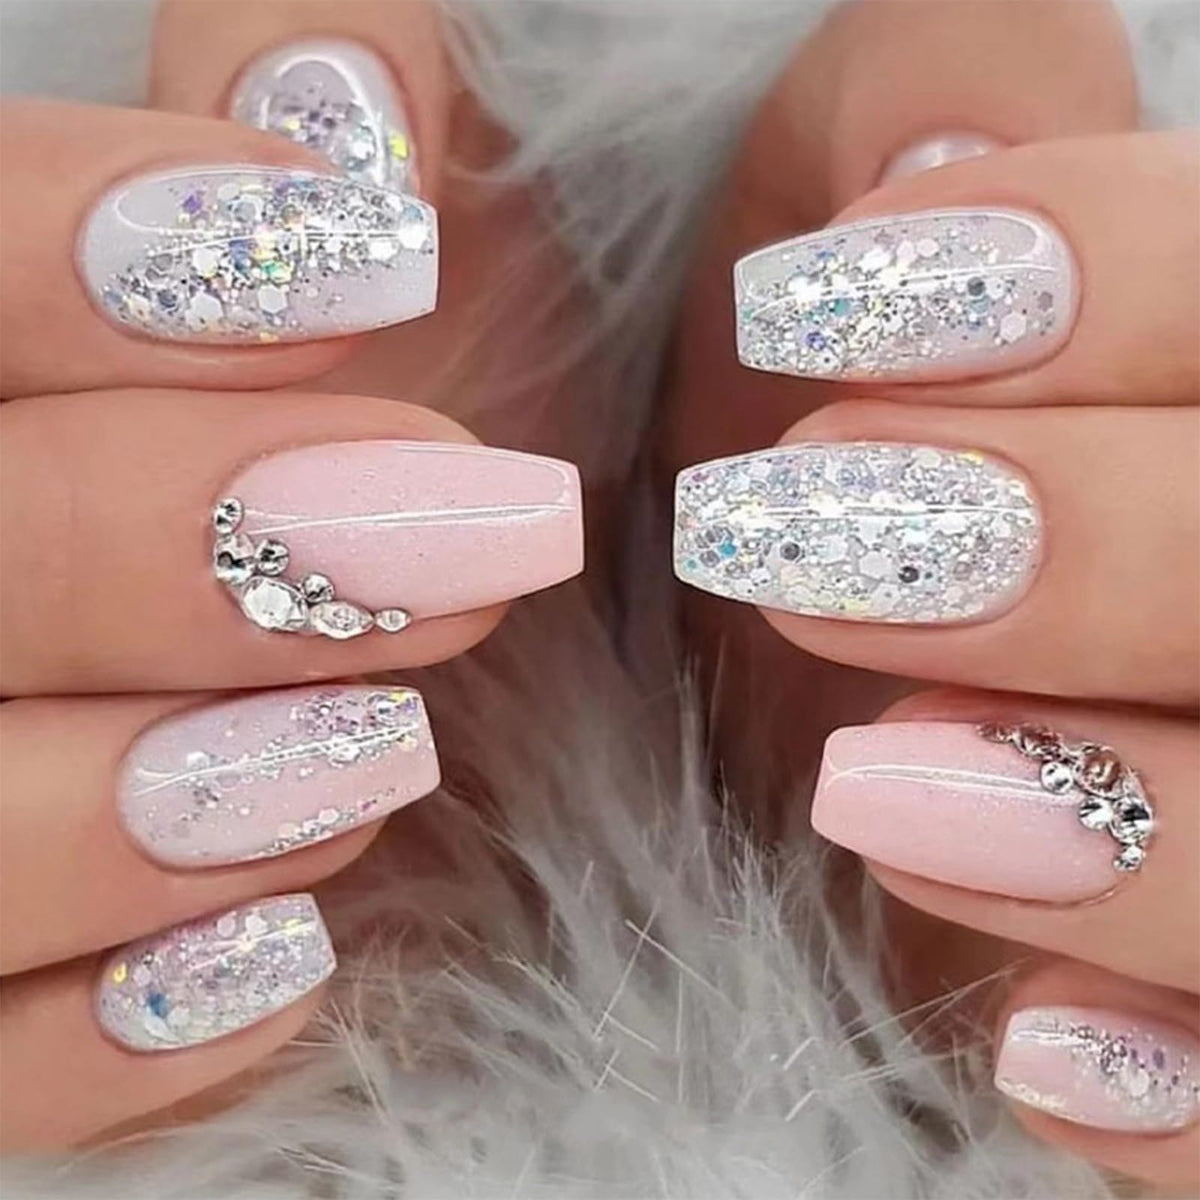 24pcs Short Coffin False Nails, Glitter Silver Pink Stick on Nails Rhinestone Ballerina Press on Nails Removable Glue-on Nails Full Cover Fake Nails Women Girls Nail Art Accessories